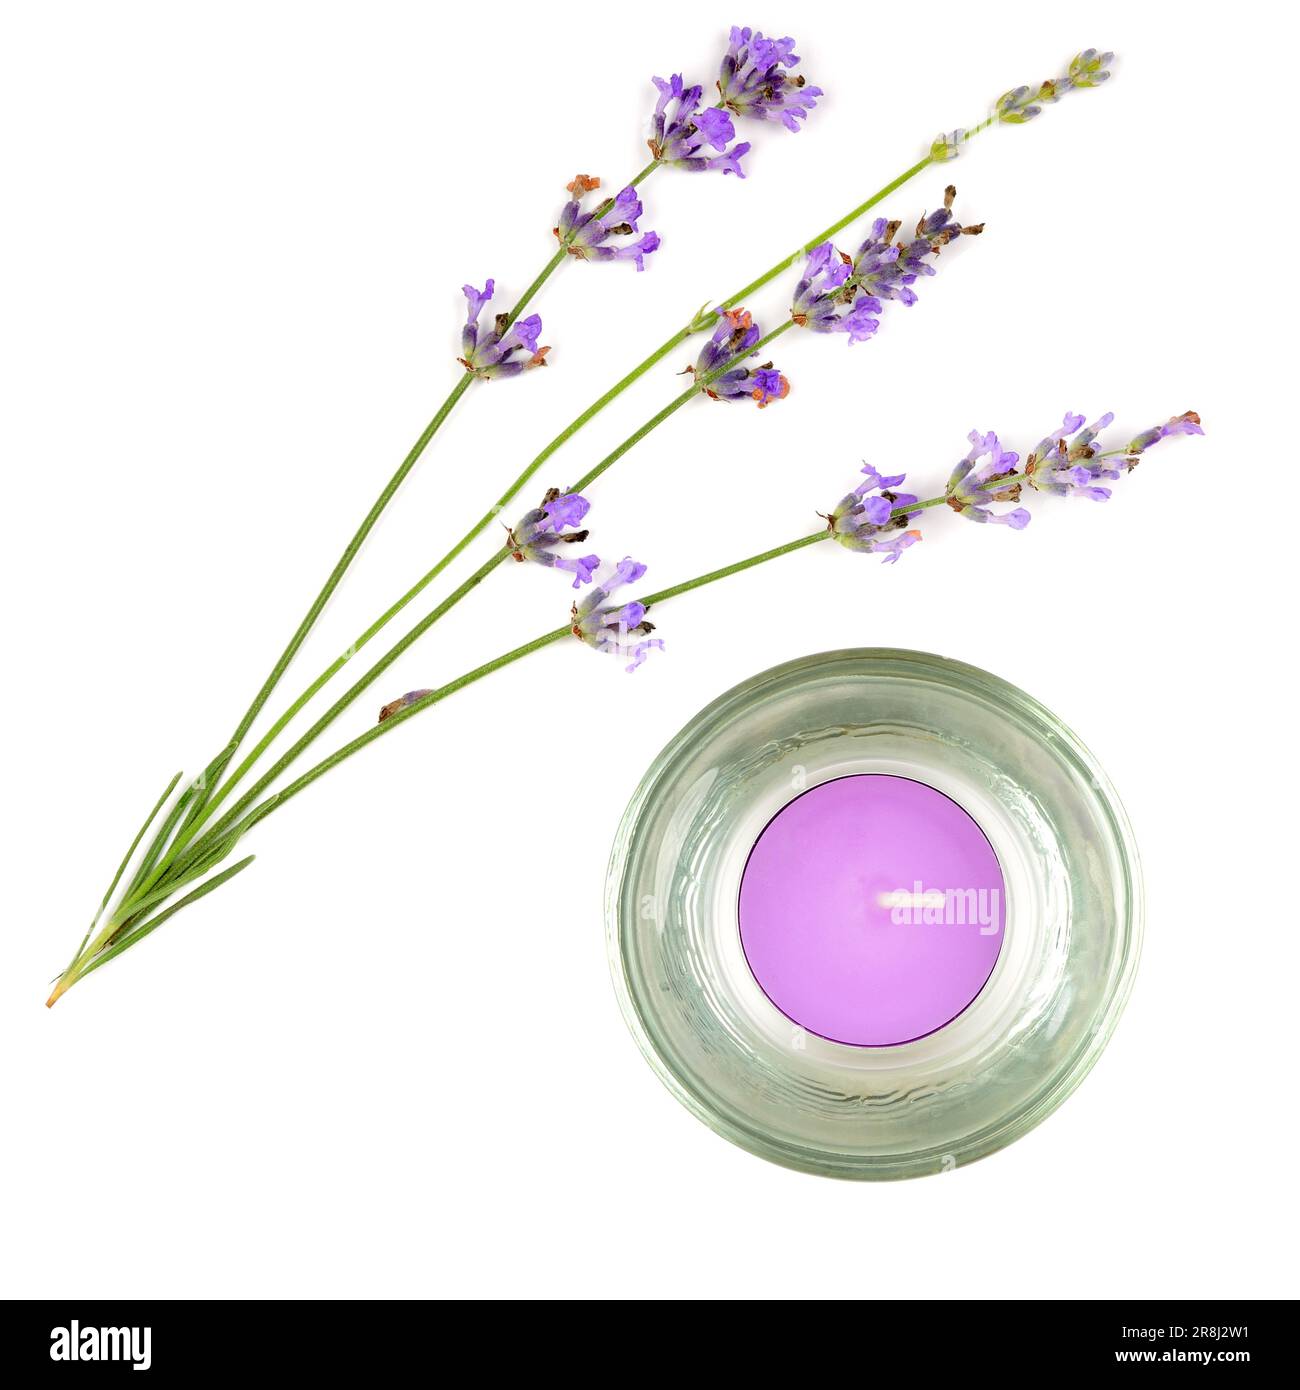 Homemade Pressed Lavender Candle (With Real Lavender!) - Garden Therapy